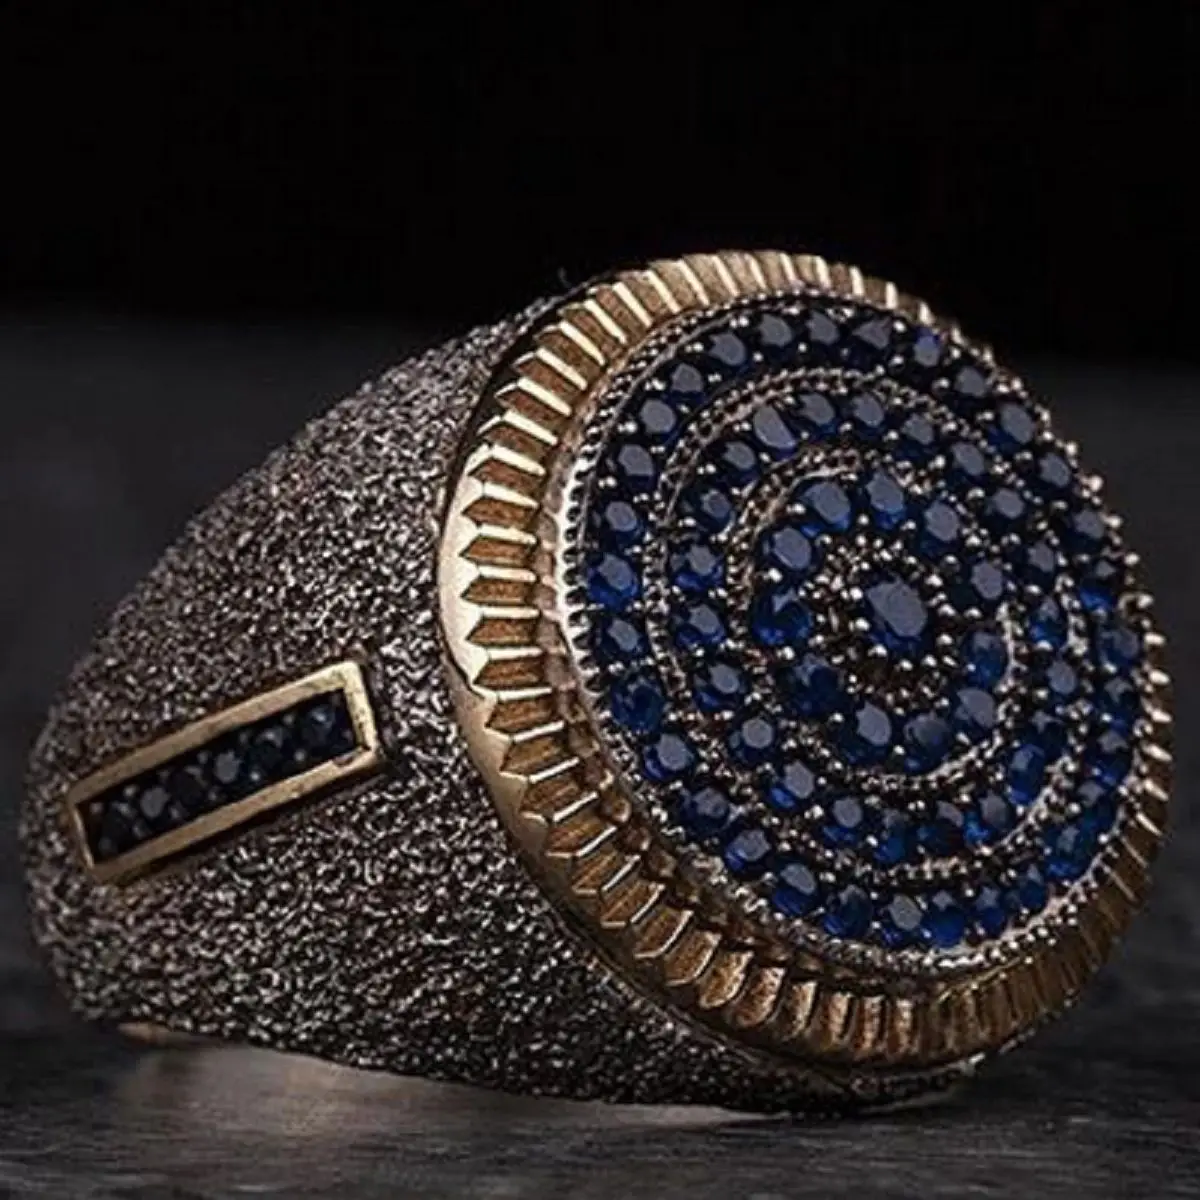 Ottoman Textured Blue Our Silver Unisex Oval Ring In Model With Sandblasting Black Texture Applied It is Decorated With Stones automatic model intelligent can sealing machines to seal easy ring pull cans with lid